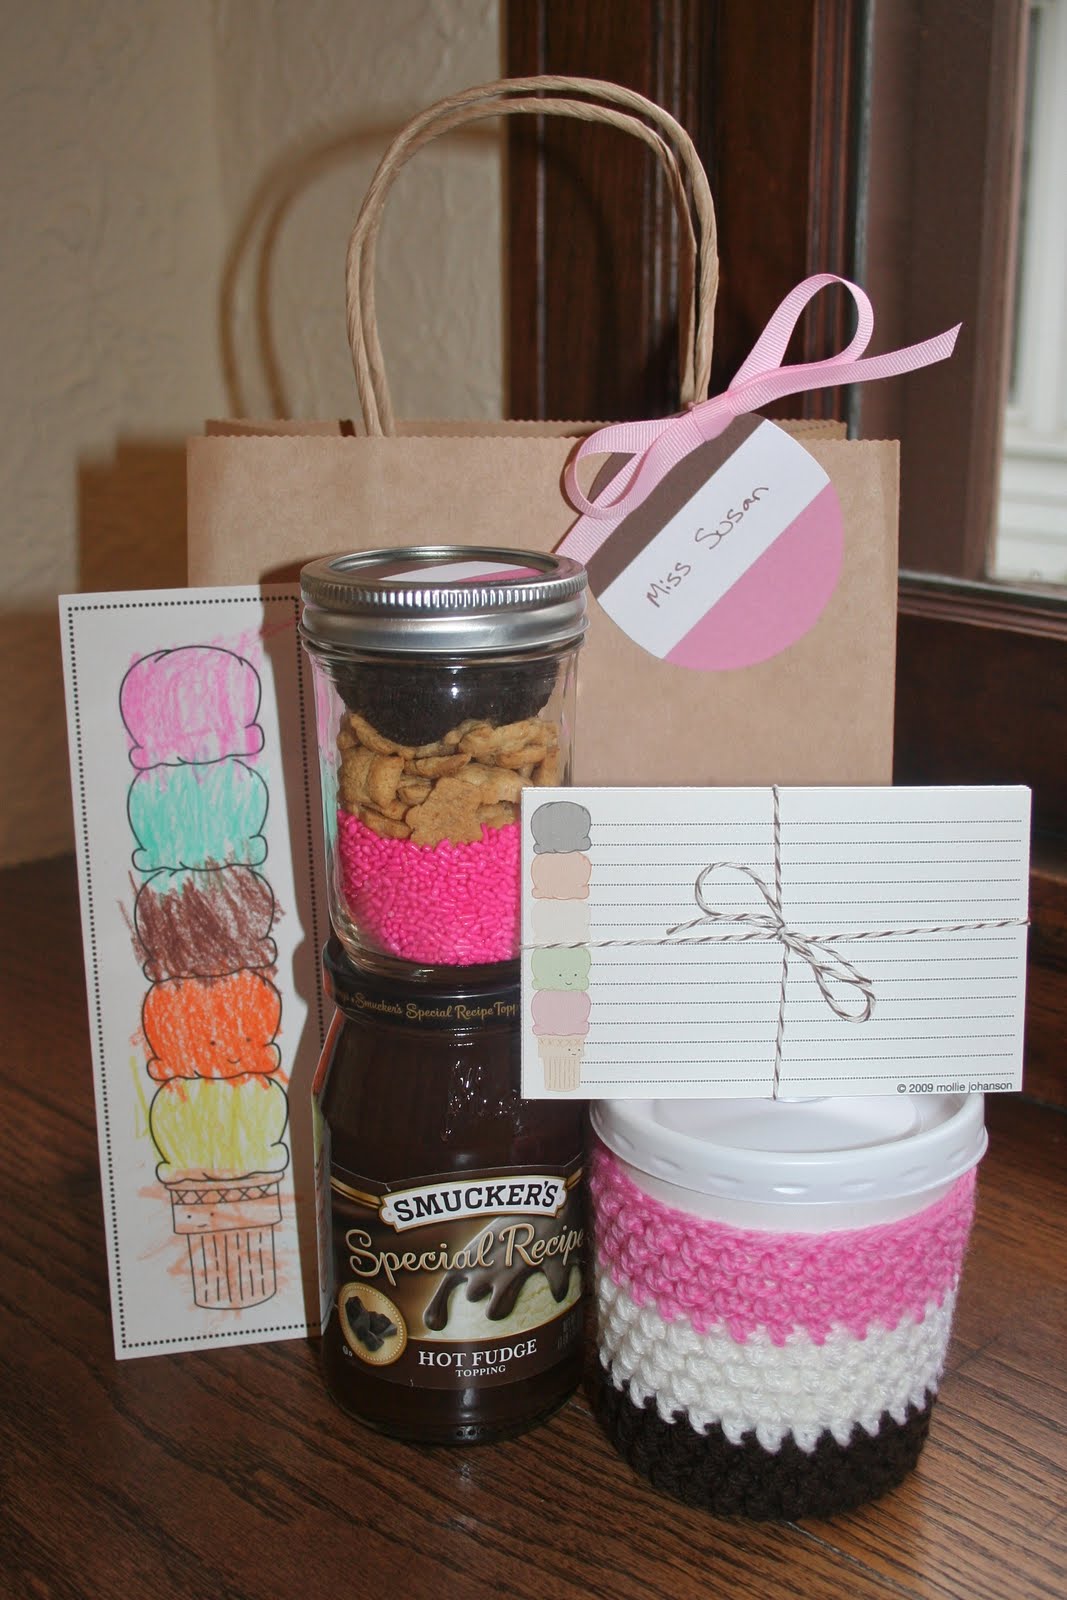 Pass the Cereal Ice Cream Gift Set